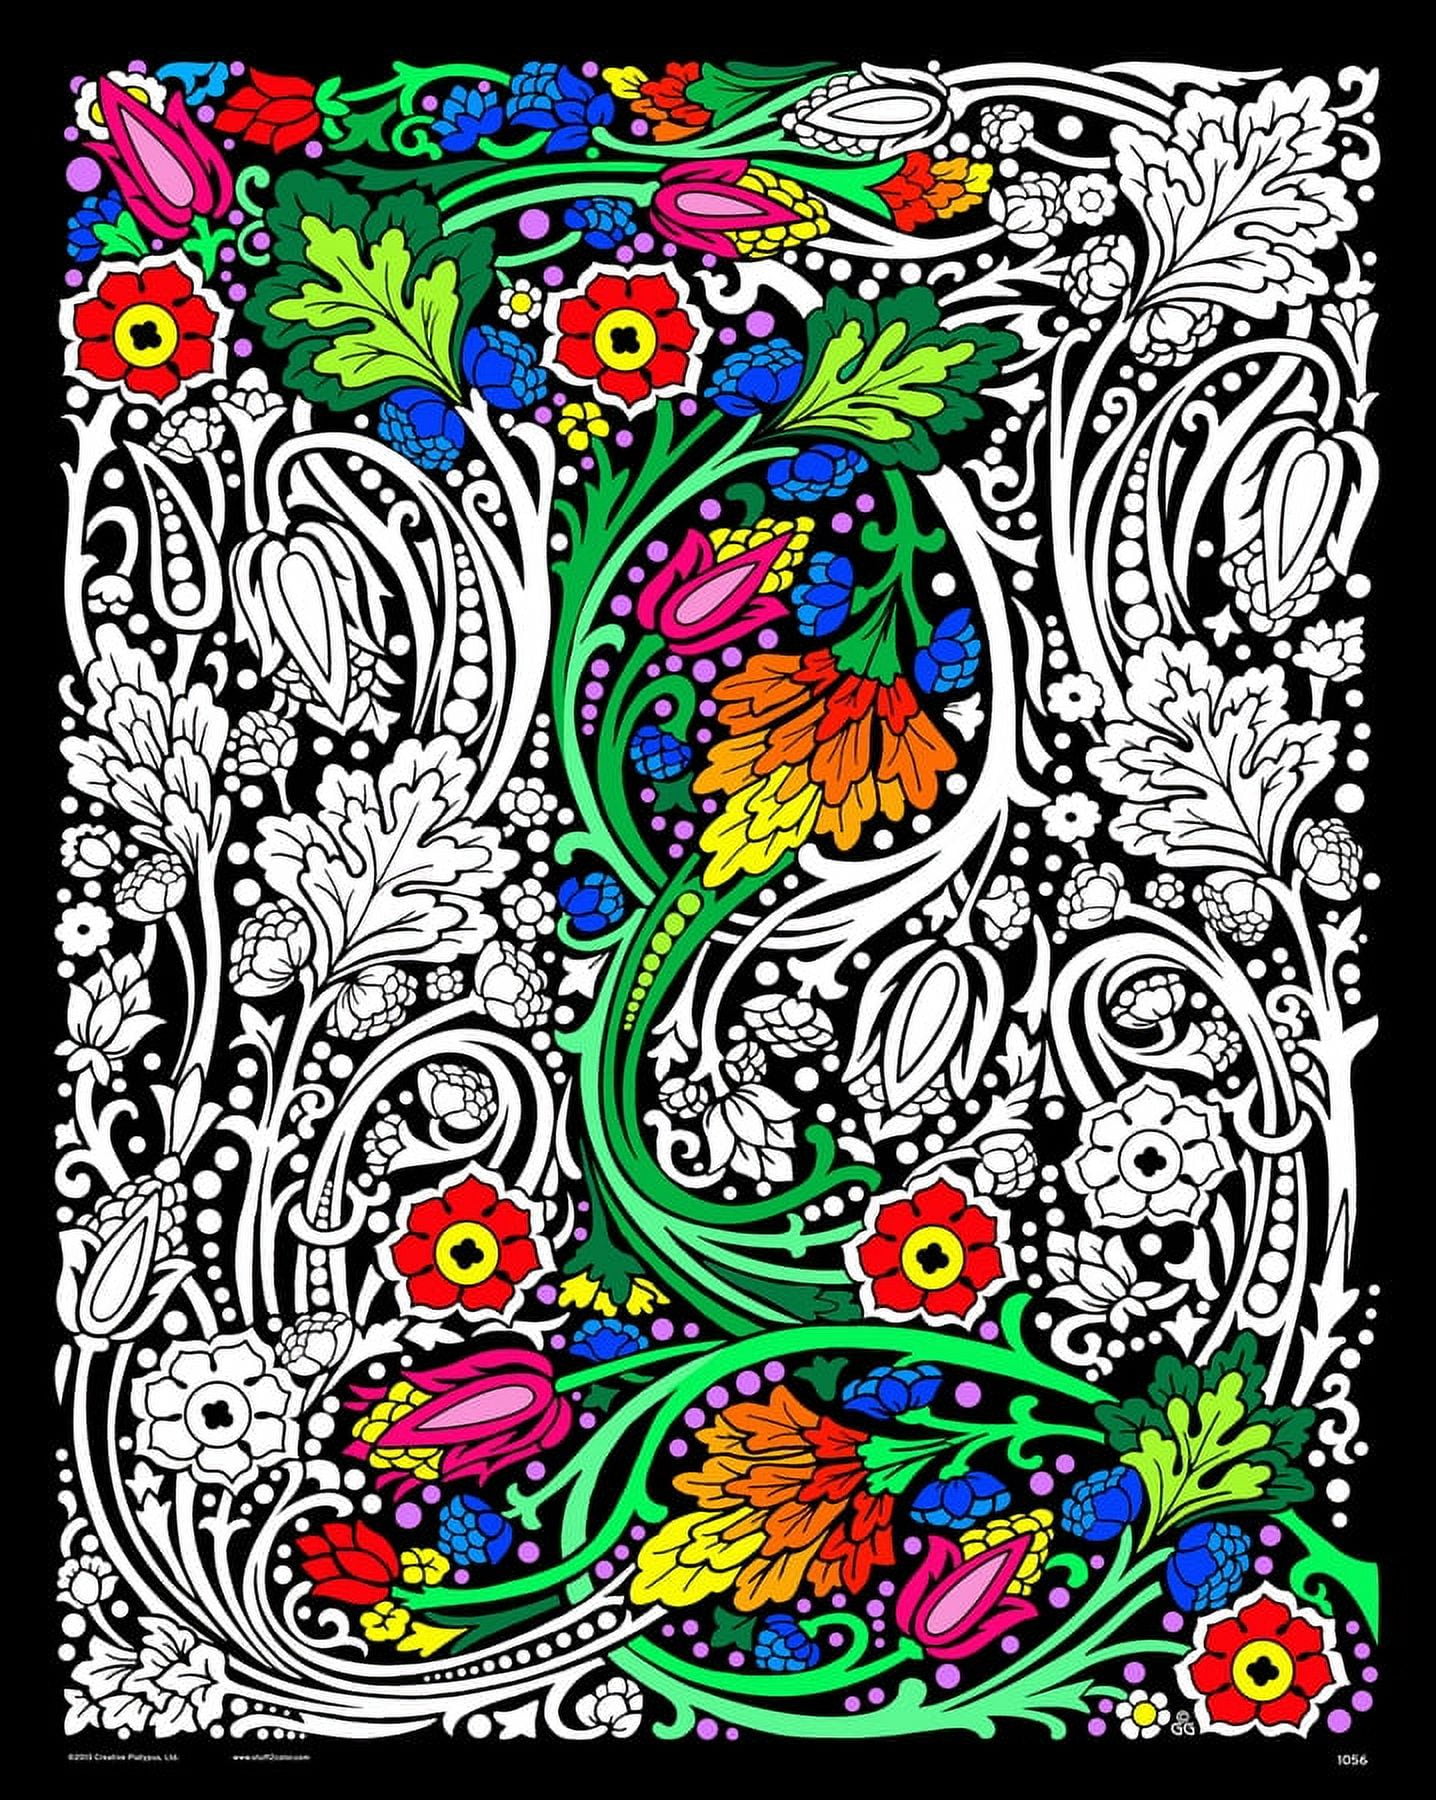 Quality velvet coloring posters adults in Alluring Styles And